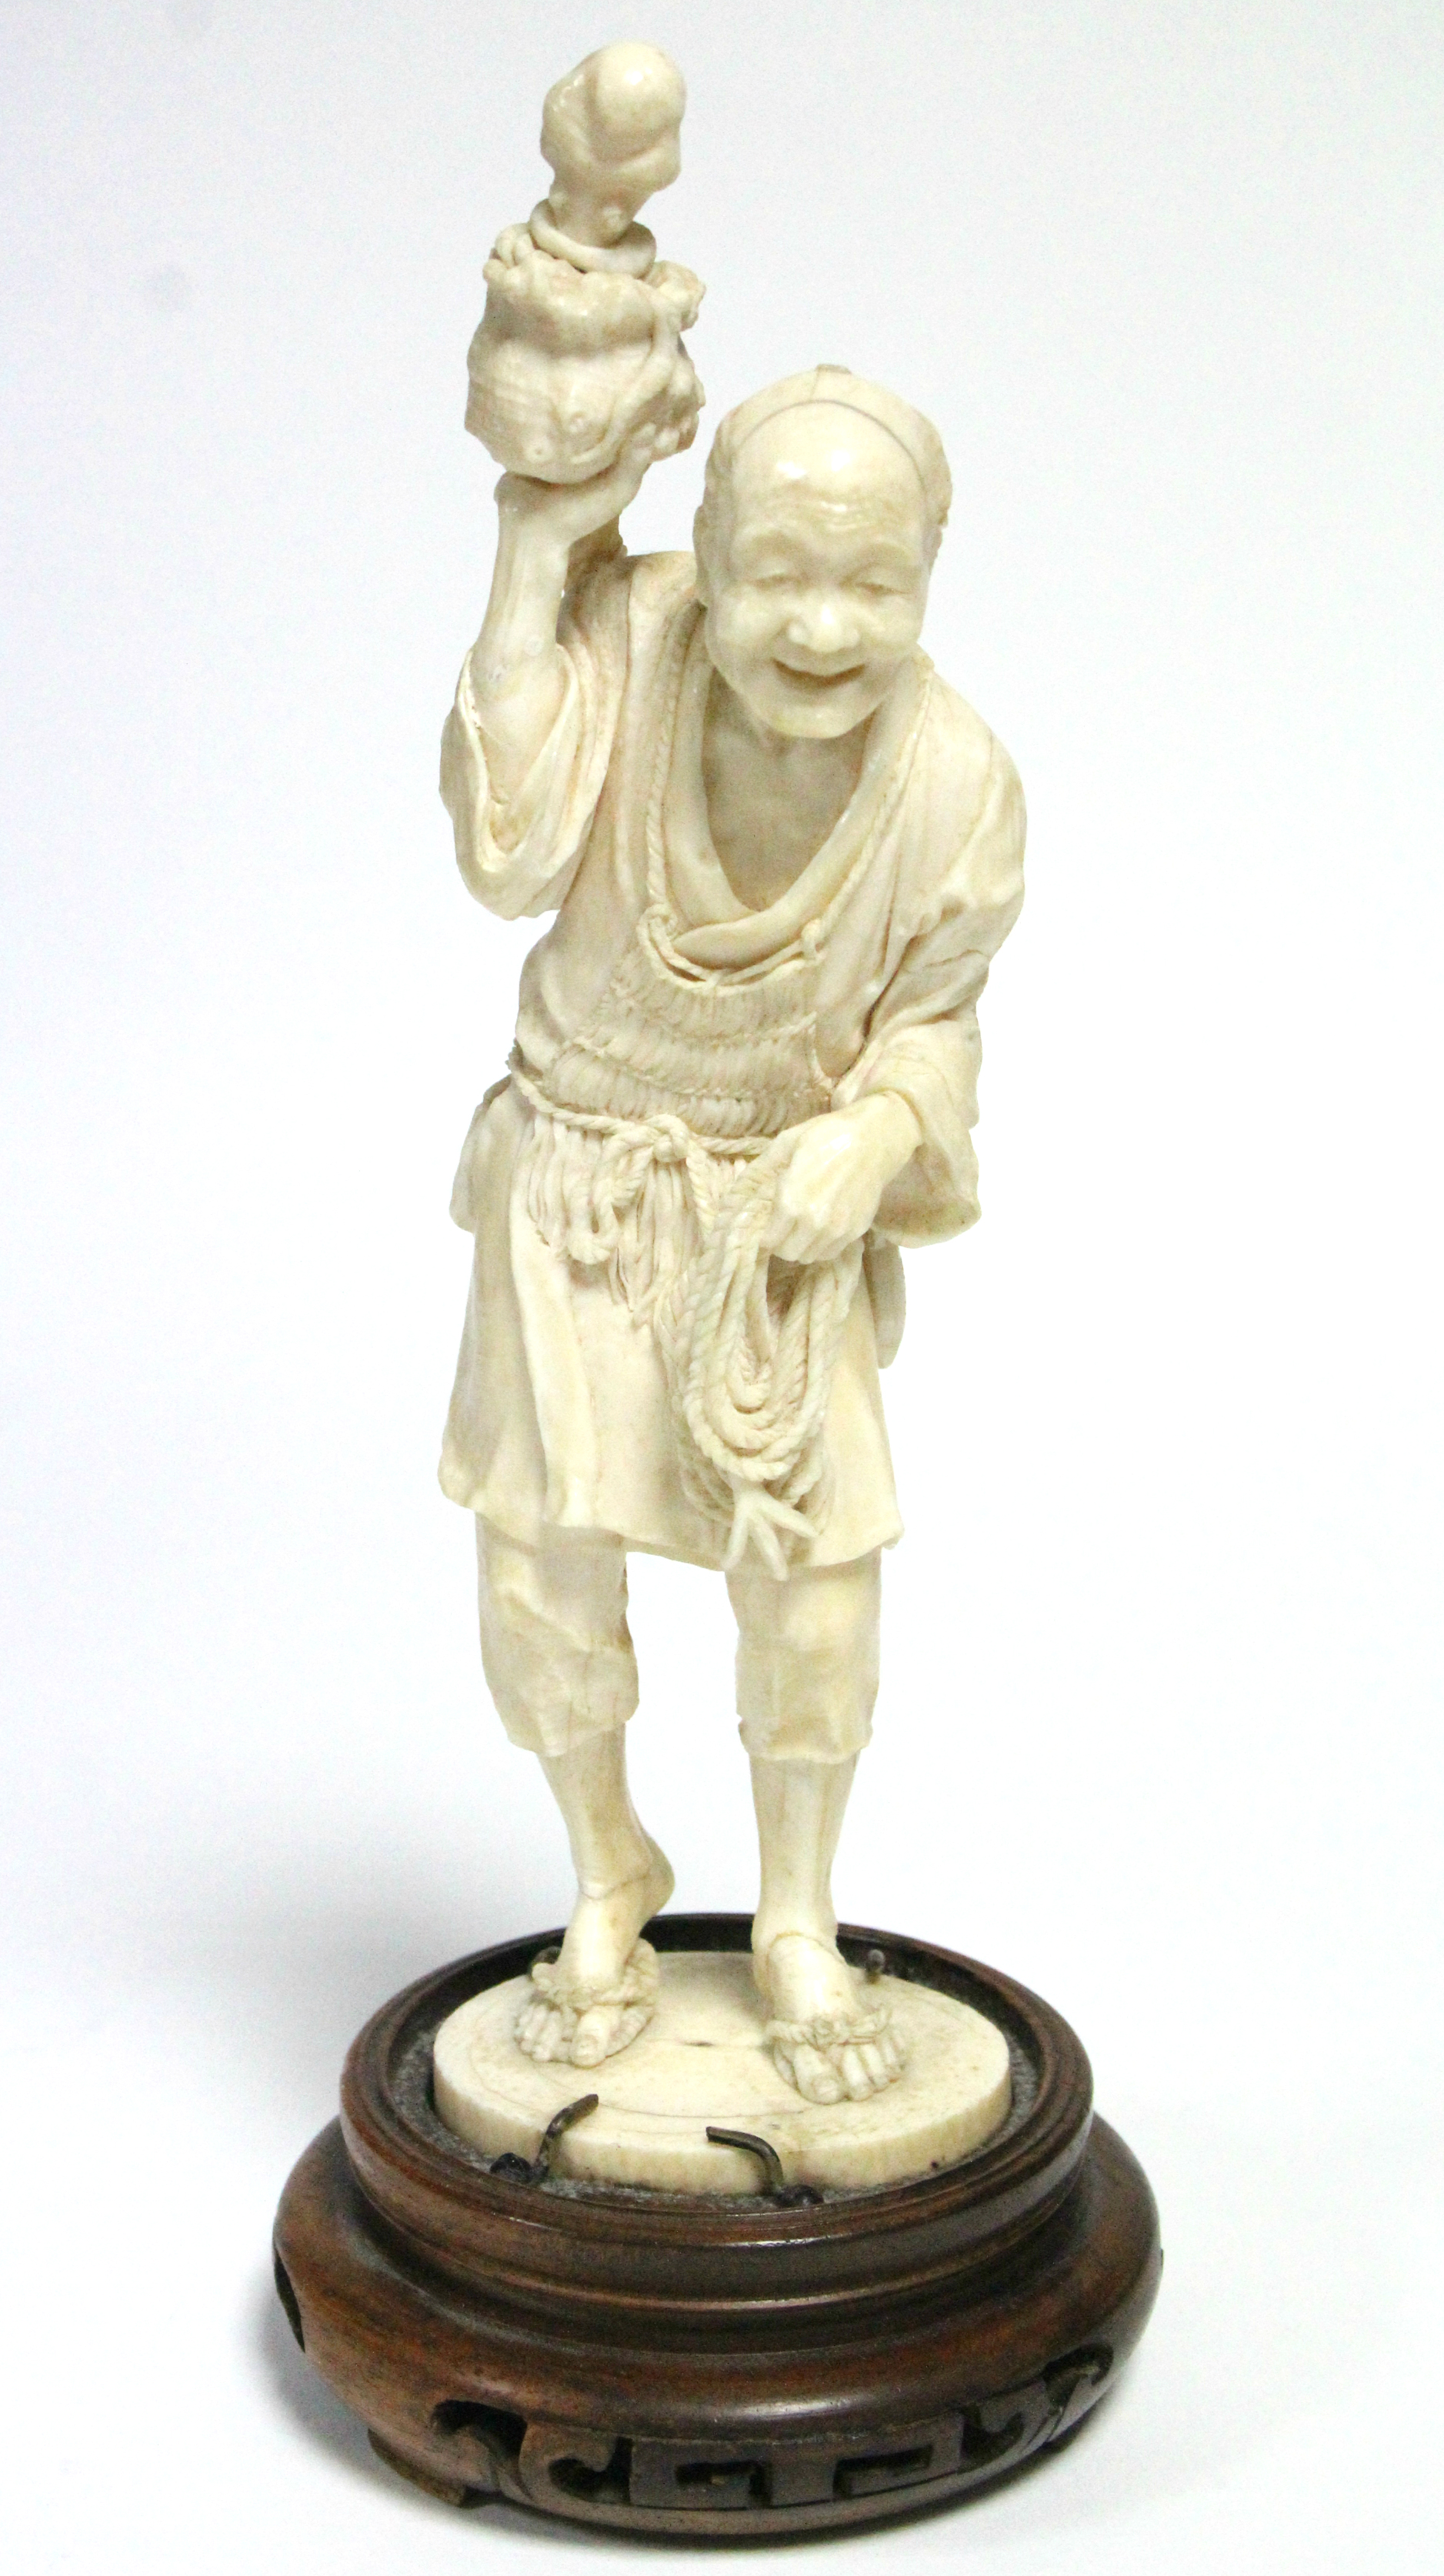 A LATE 19th century JAPANESE IVORY OKIMONO of a standing fisherman holding aloft an octopus in a pot